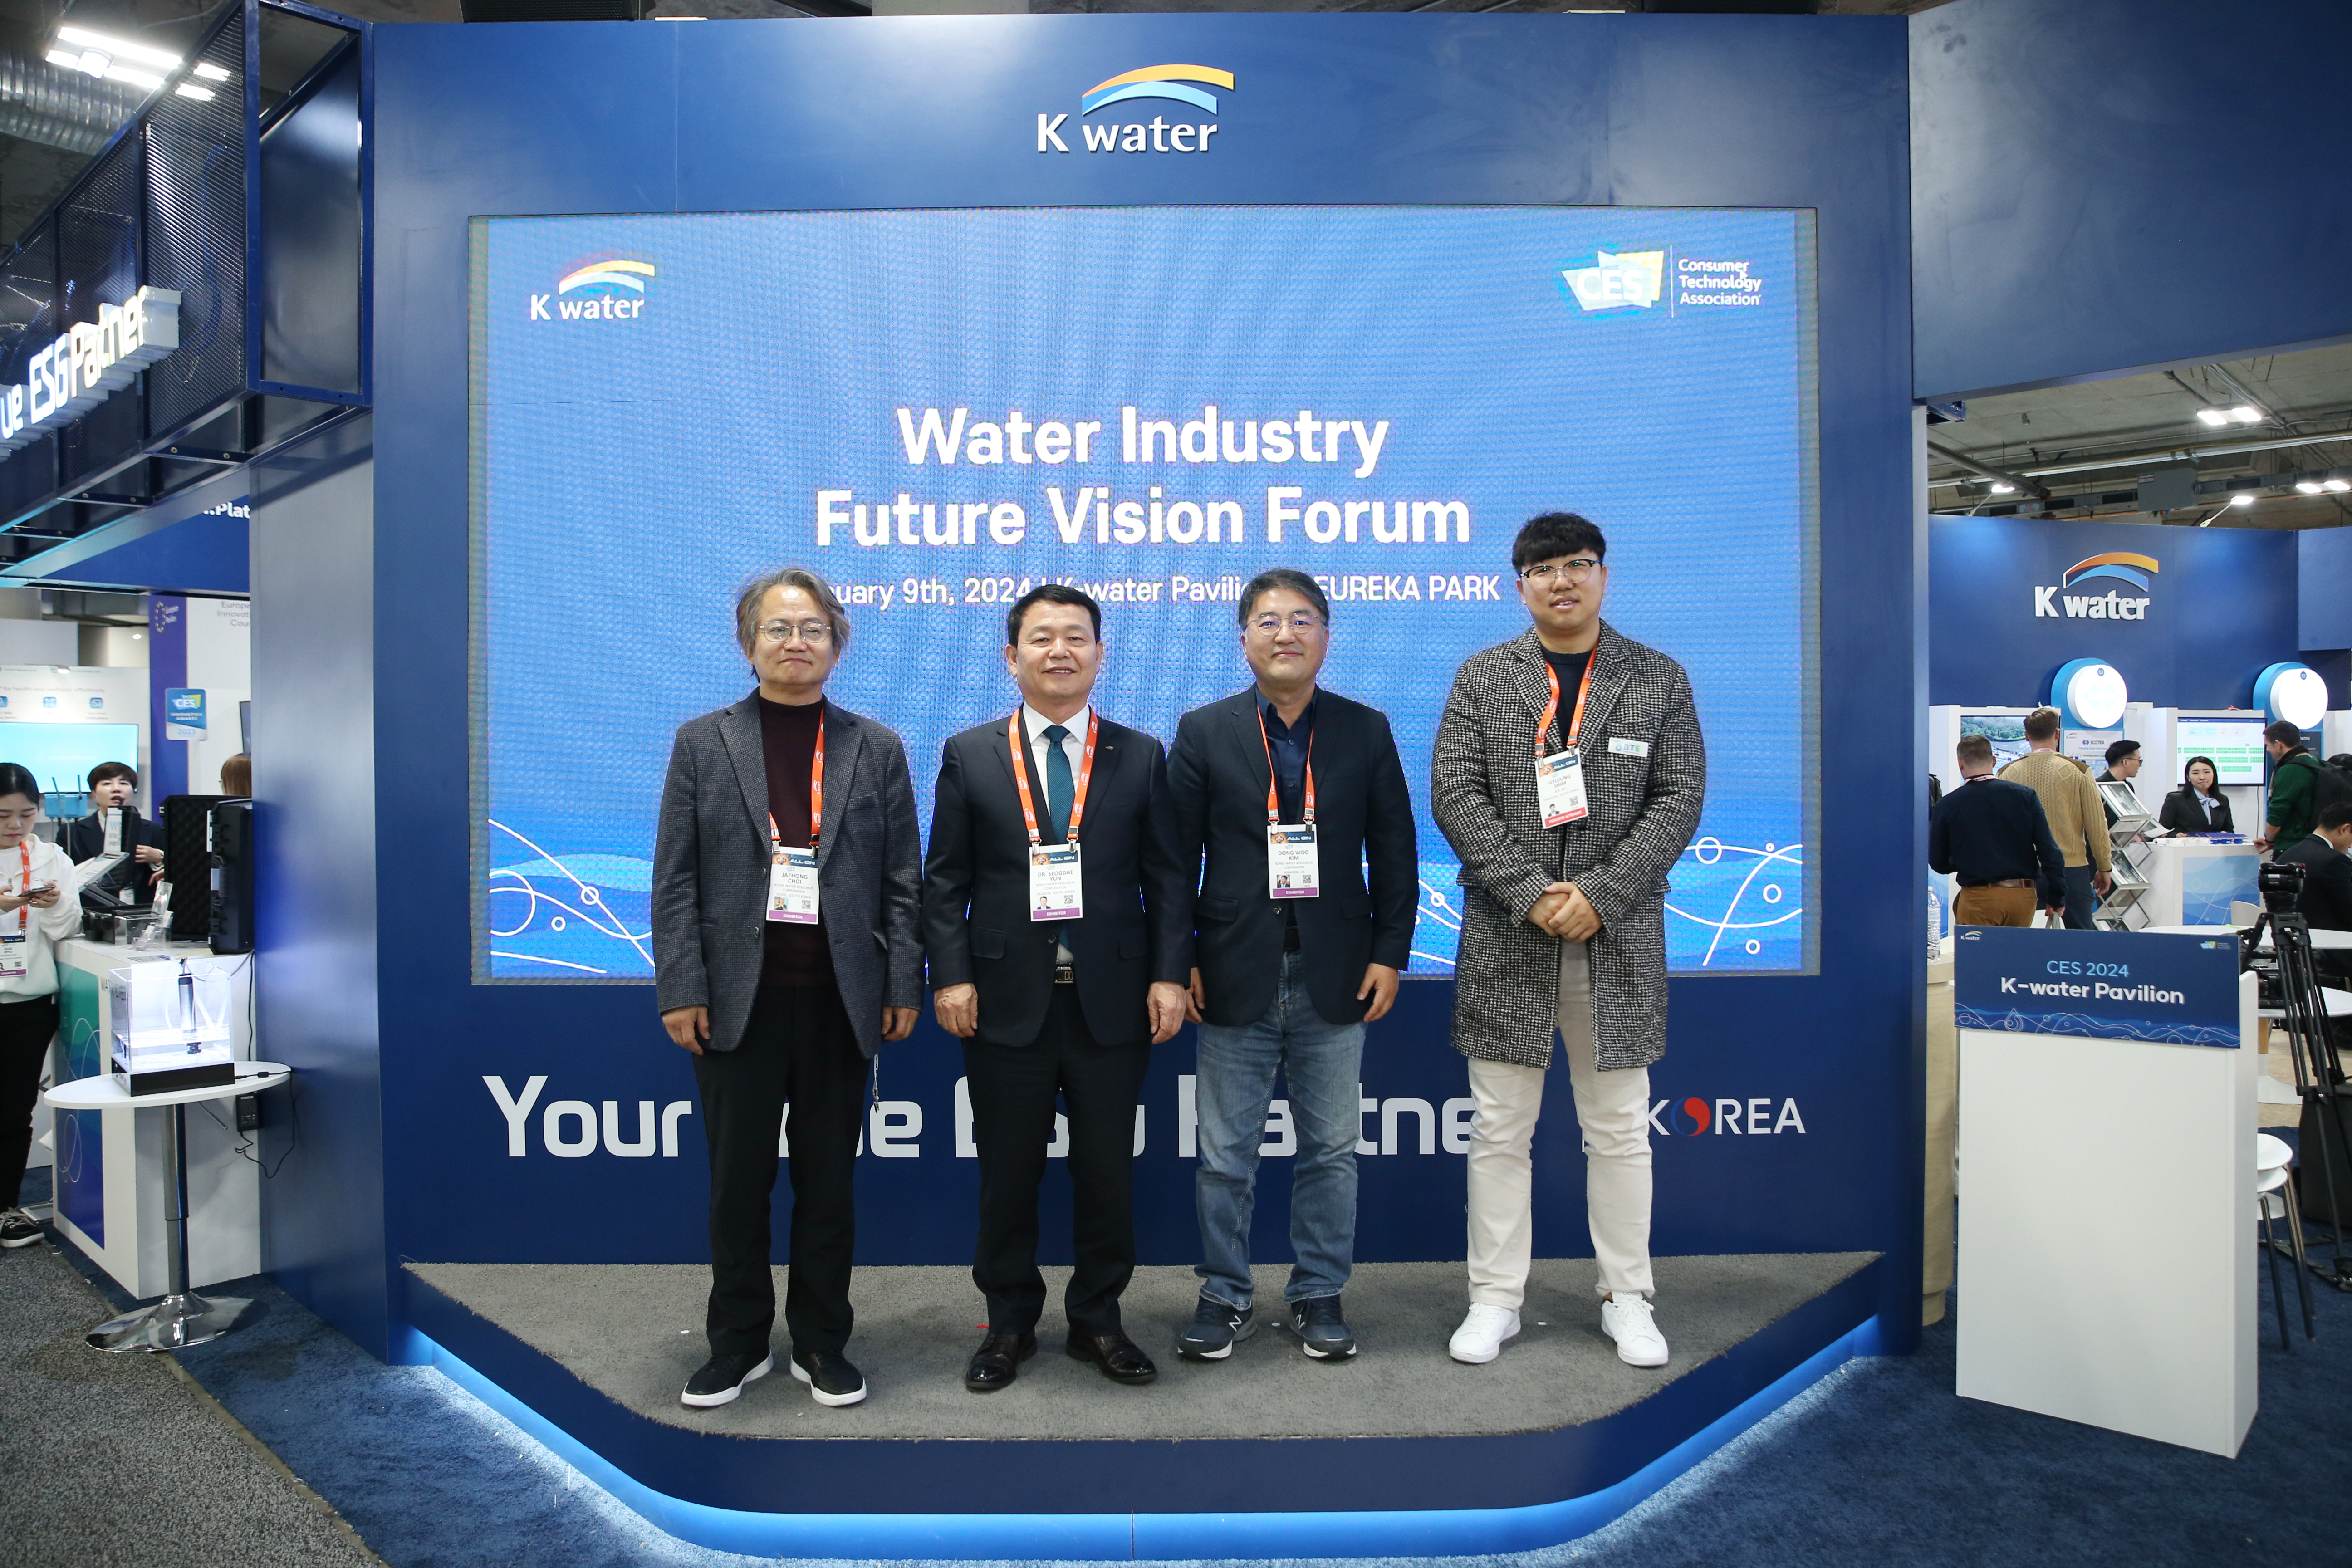 Water Industry Future Vision Forum